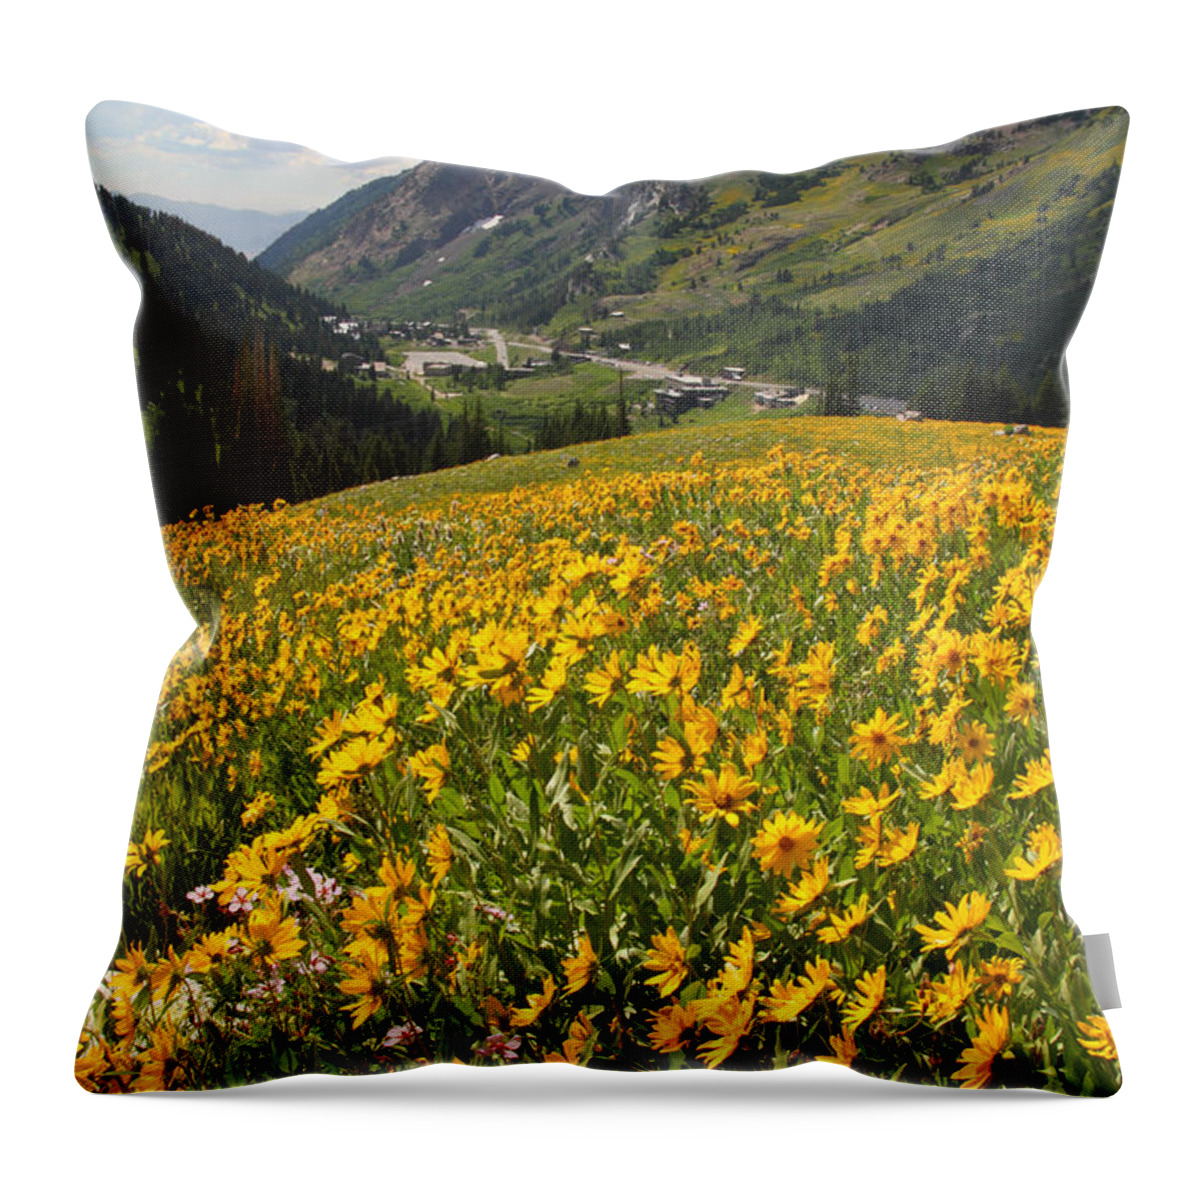 Landscape Throw Pillow featuring the photograph Wasatch Wildflowers by Brett Pelletier